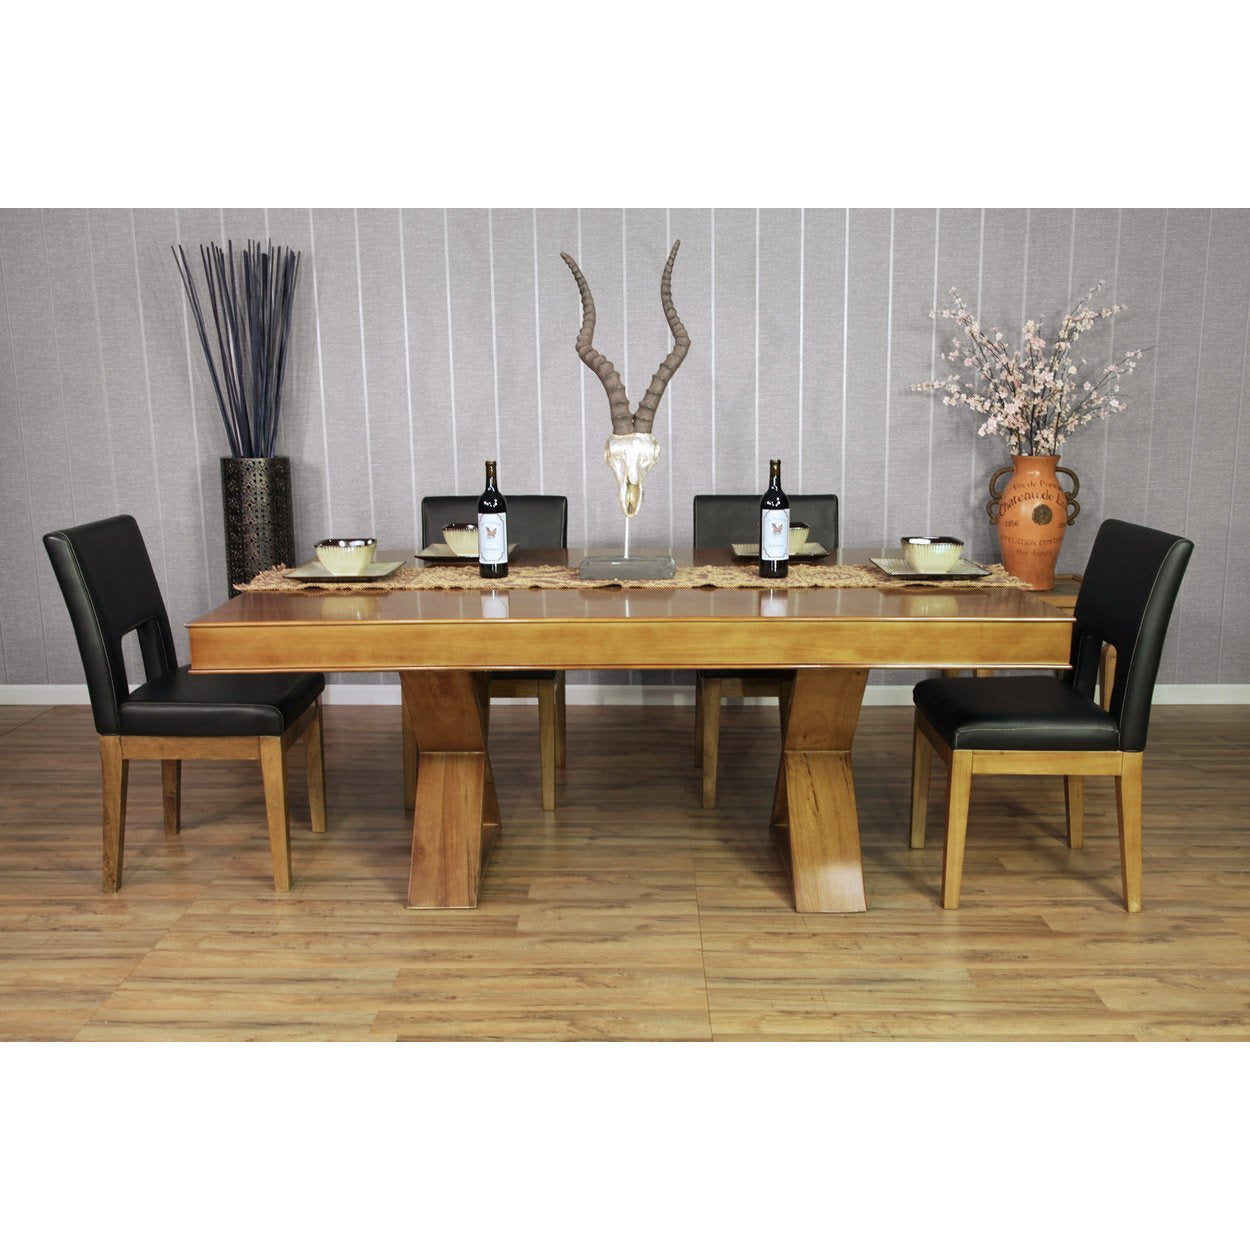 BBO Poker Tables Helmsley Poker Dining Table and Chair Set